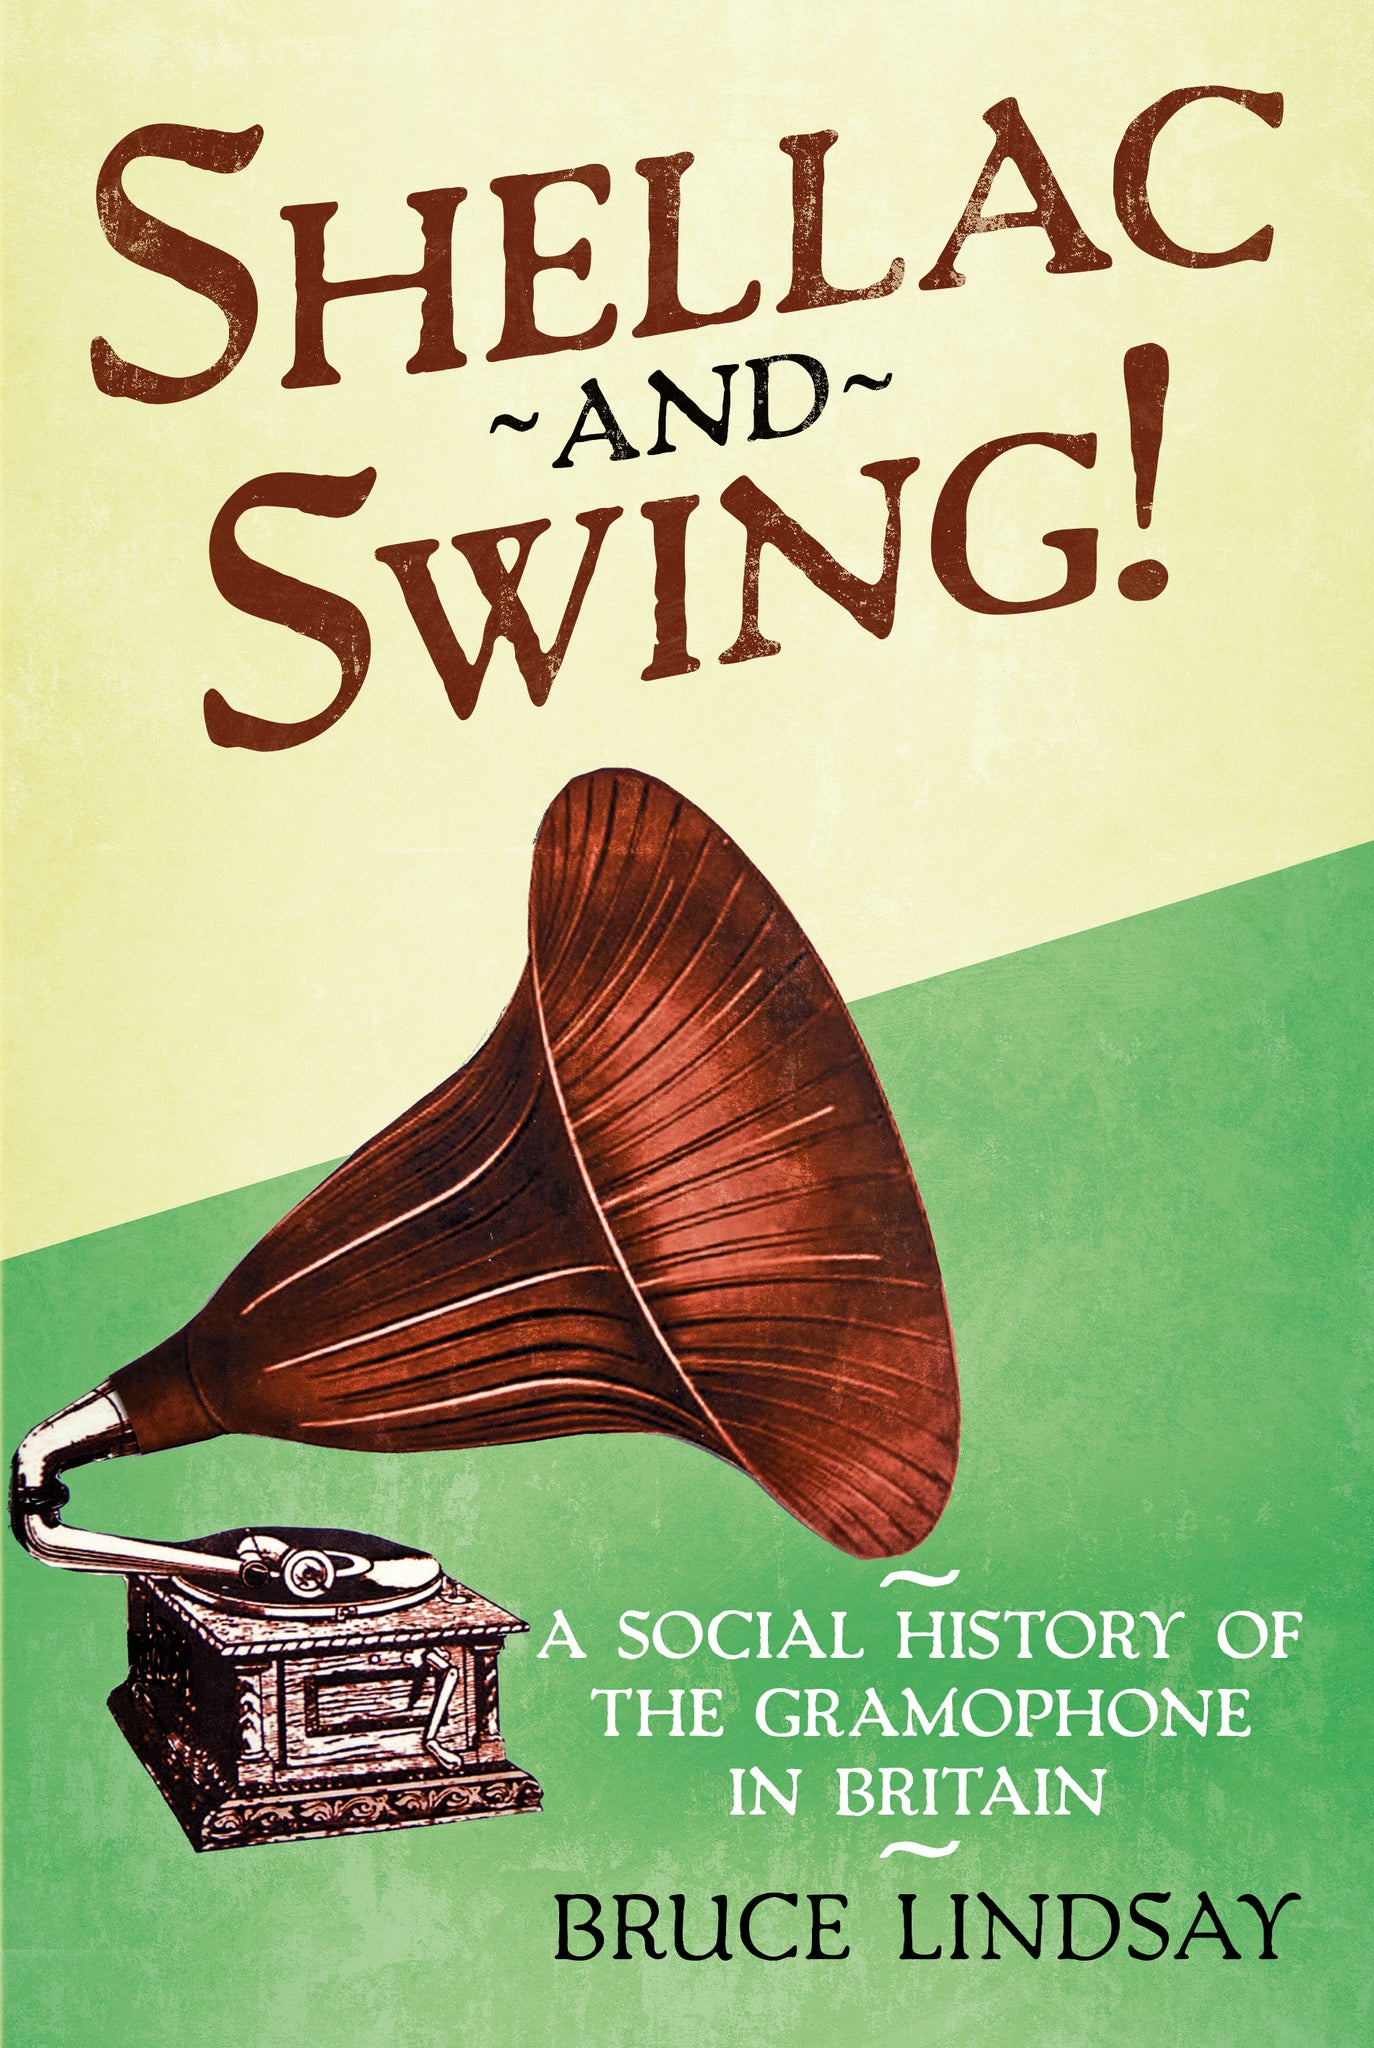 Shellac and Swing! A Social History of the Gramophone in Britain